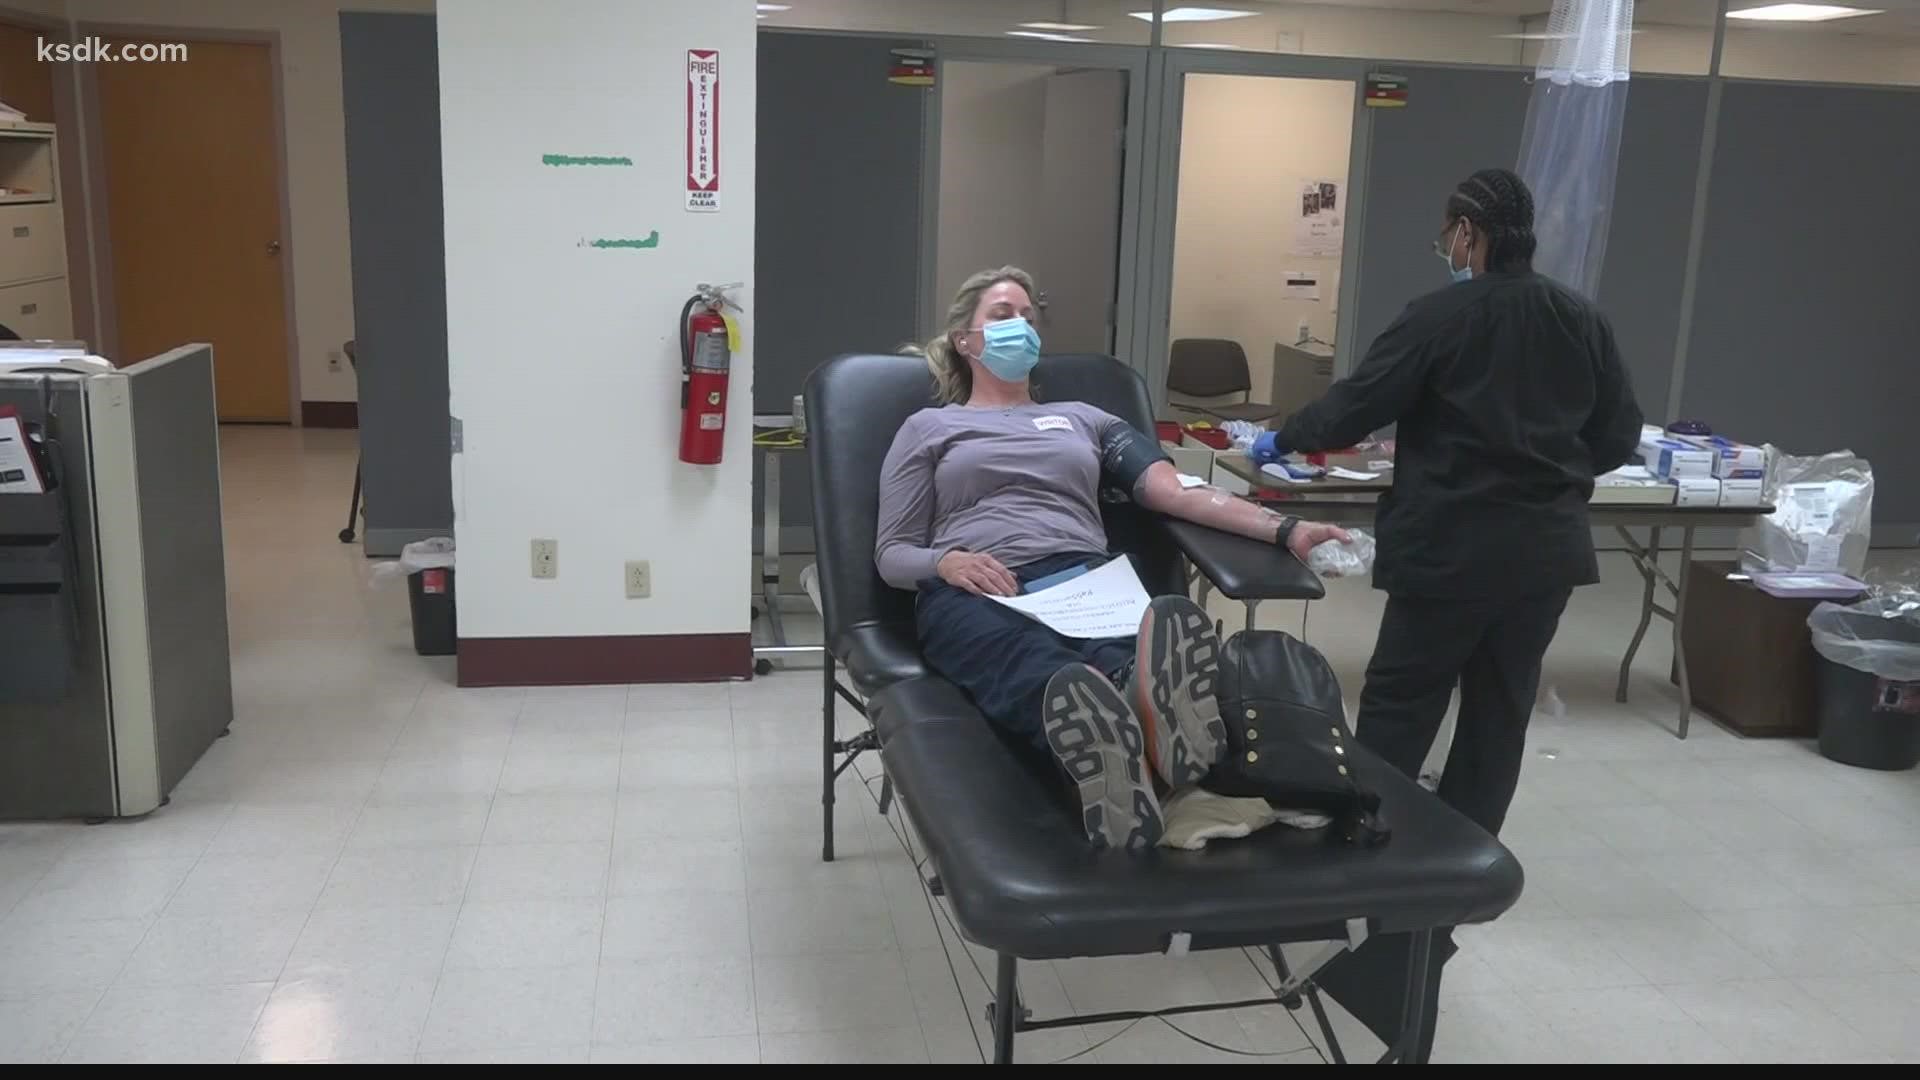 The country is under a blood supply shortage. Local and national groups say it is time to lift a ban on gay men donating blood.